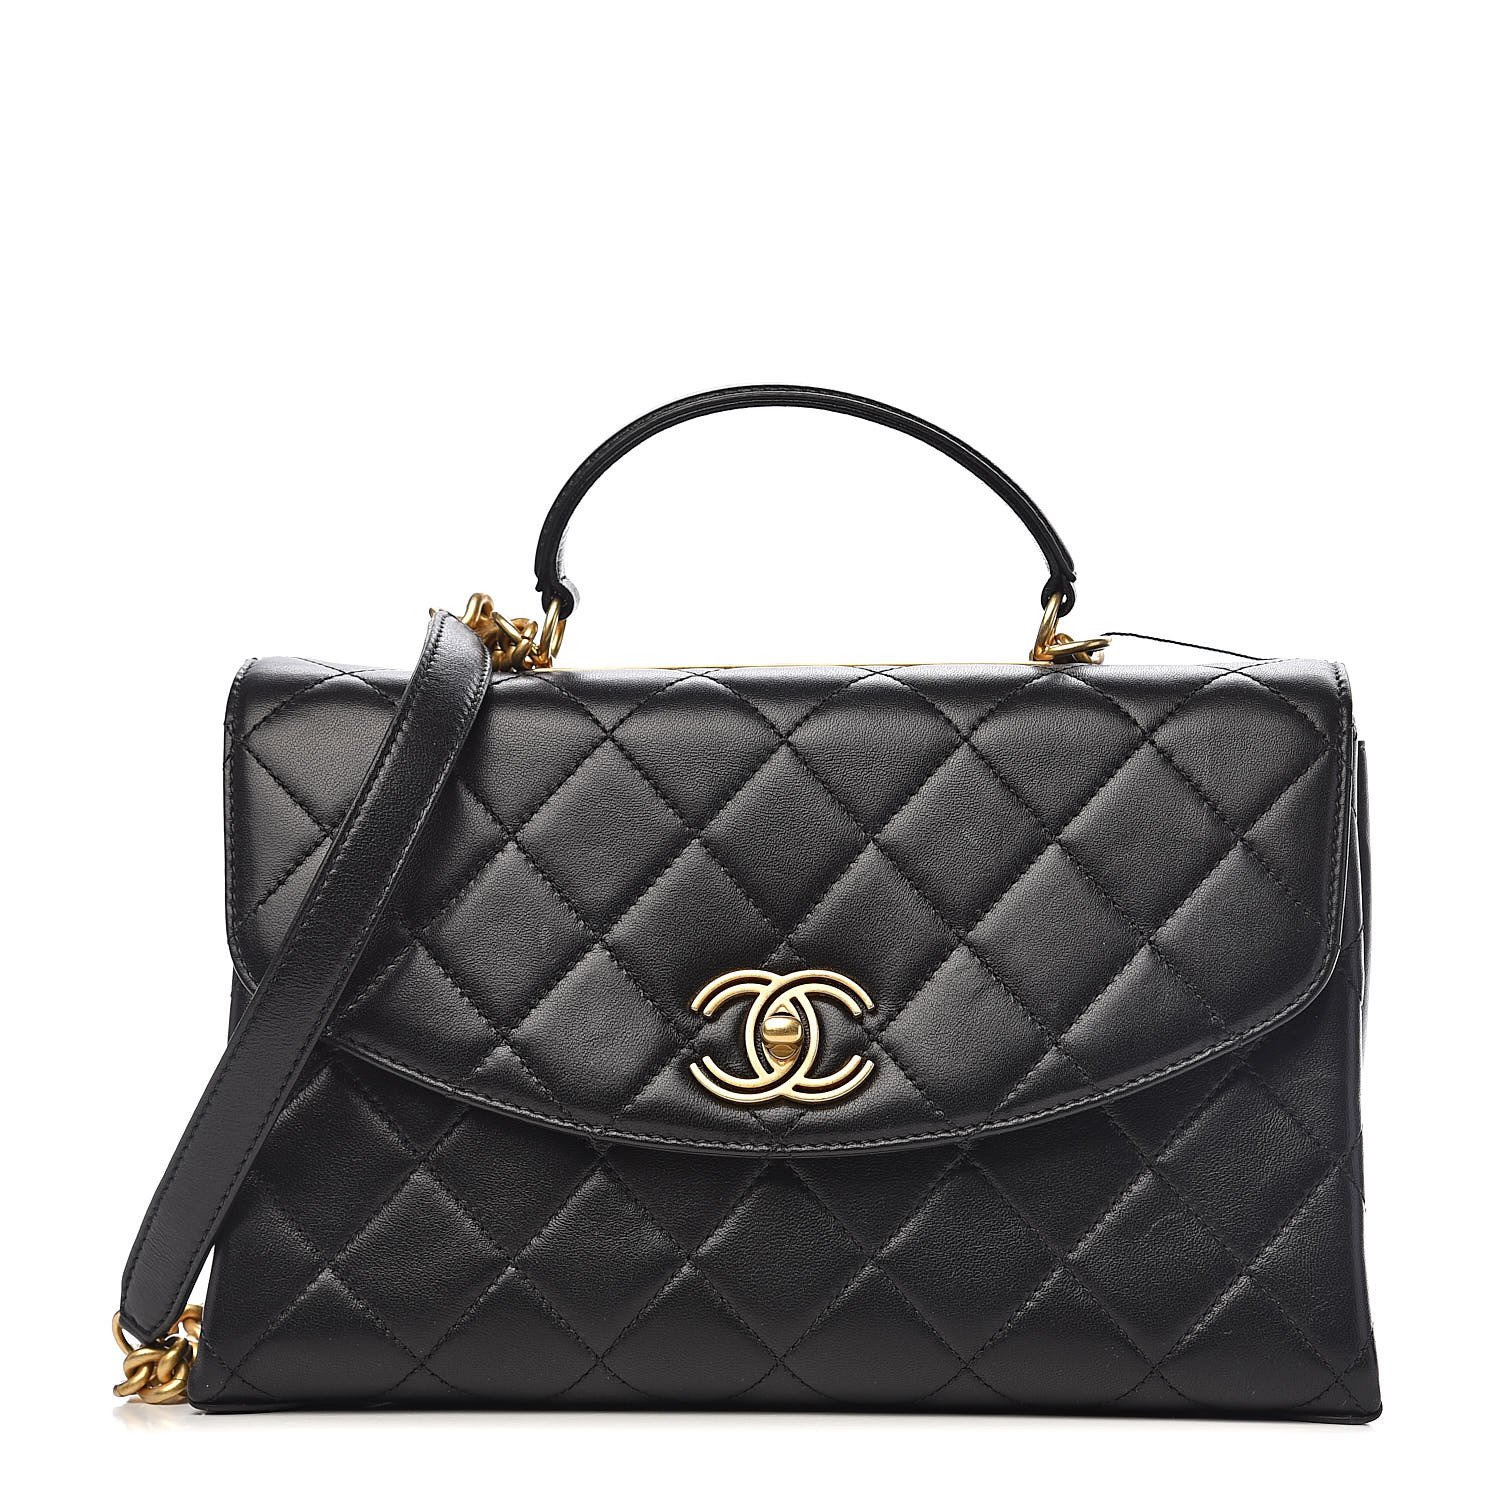 CHANEL Lambskin Quilted Large Top Handle Bag Bag 530960